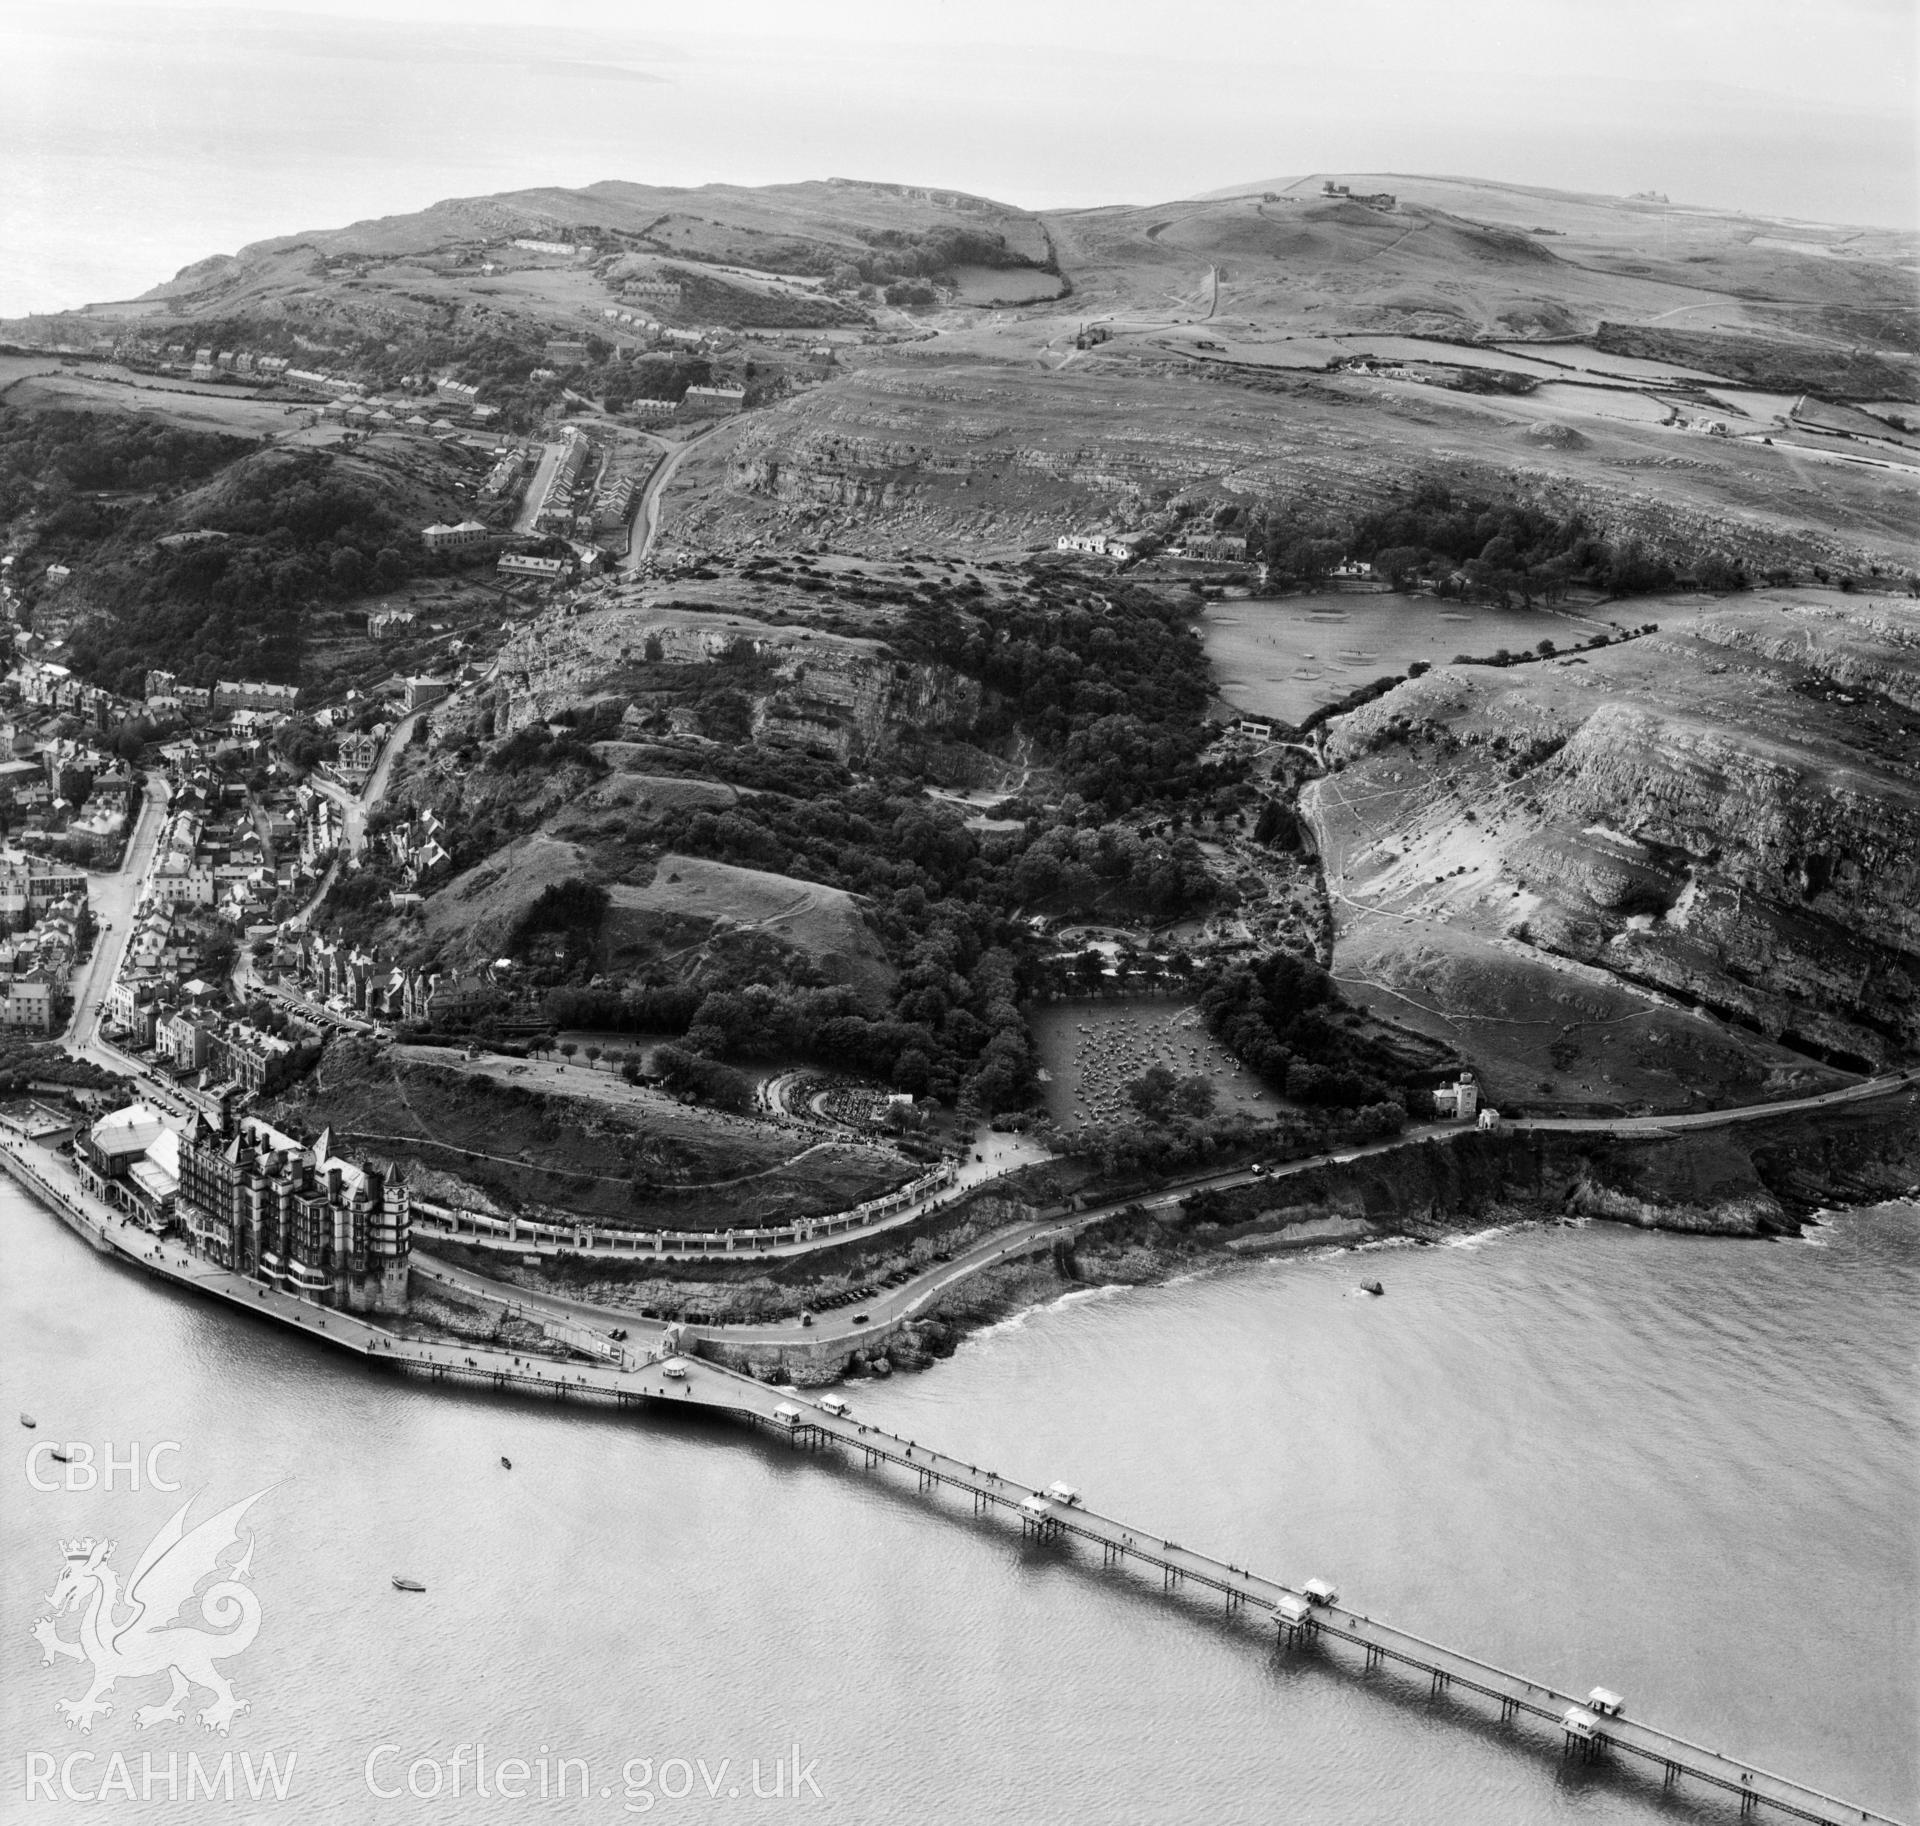 View of Llandudno showing Happy Valley area, pavillion and Grand Hotel